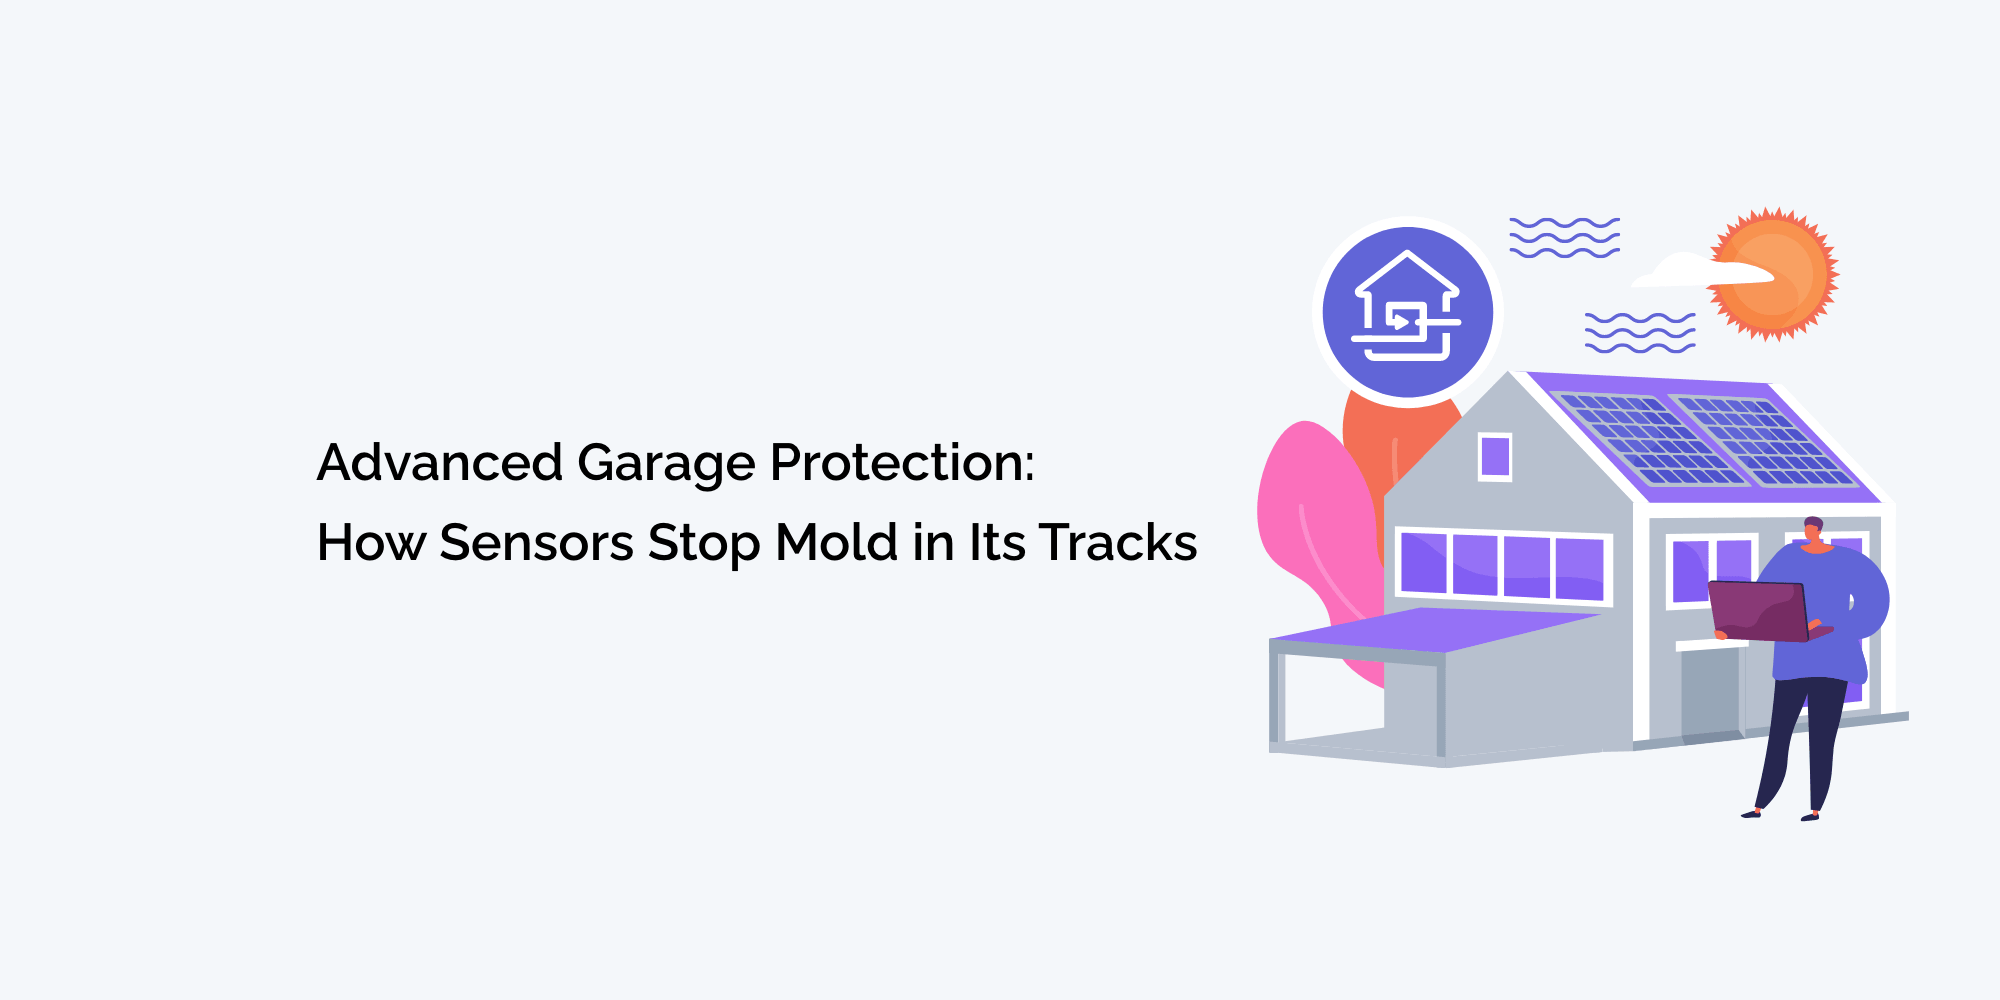 Advanced Garage Protection: How Sensors Stop Mold in Its Tracks